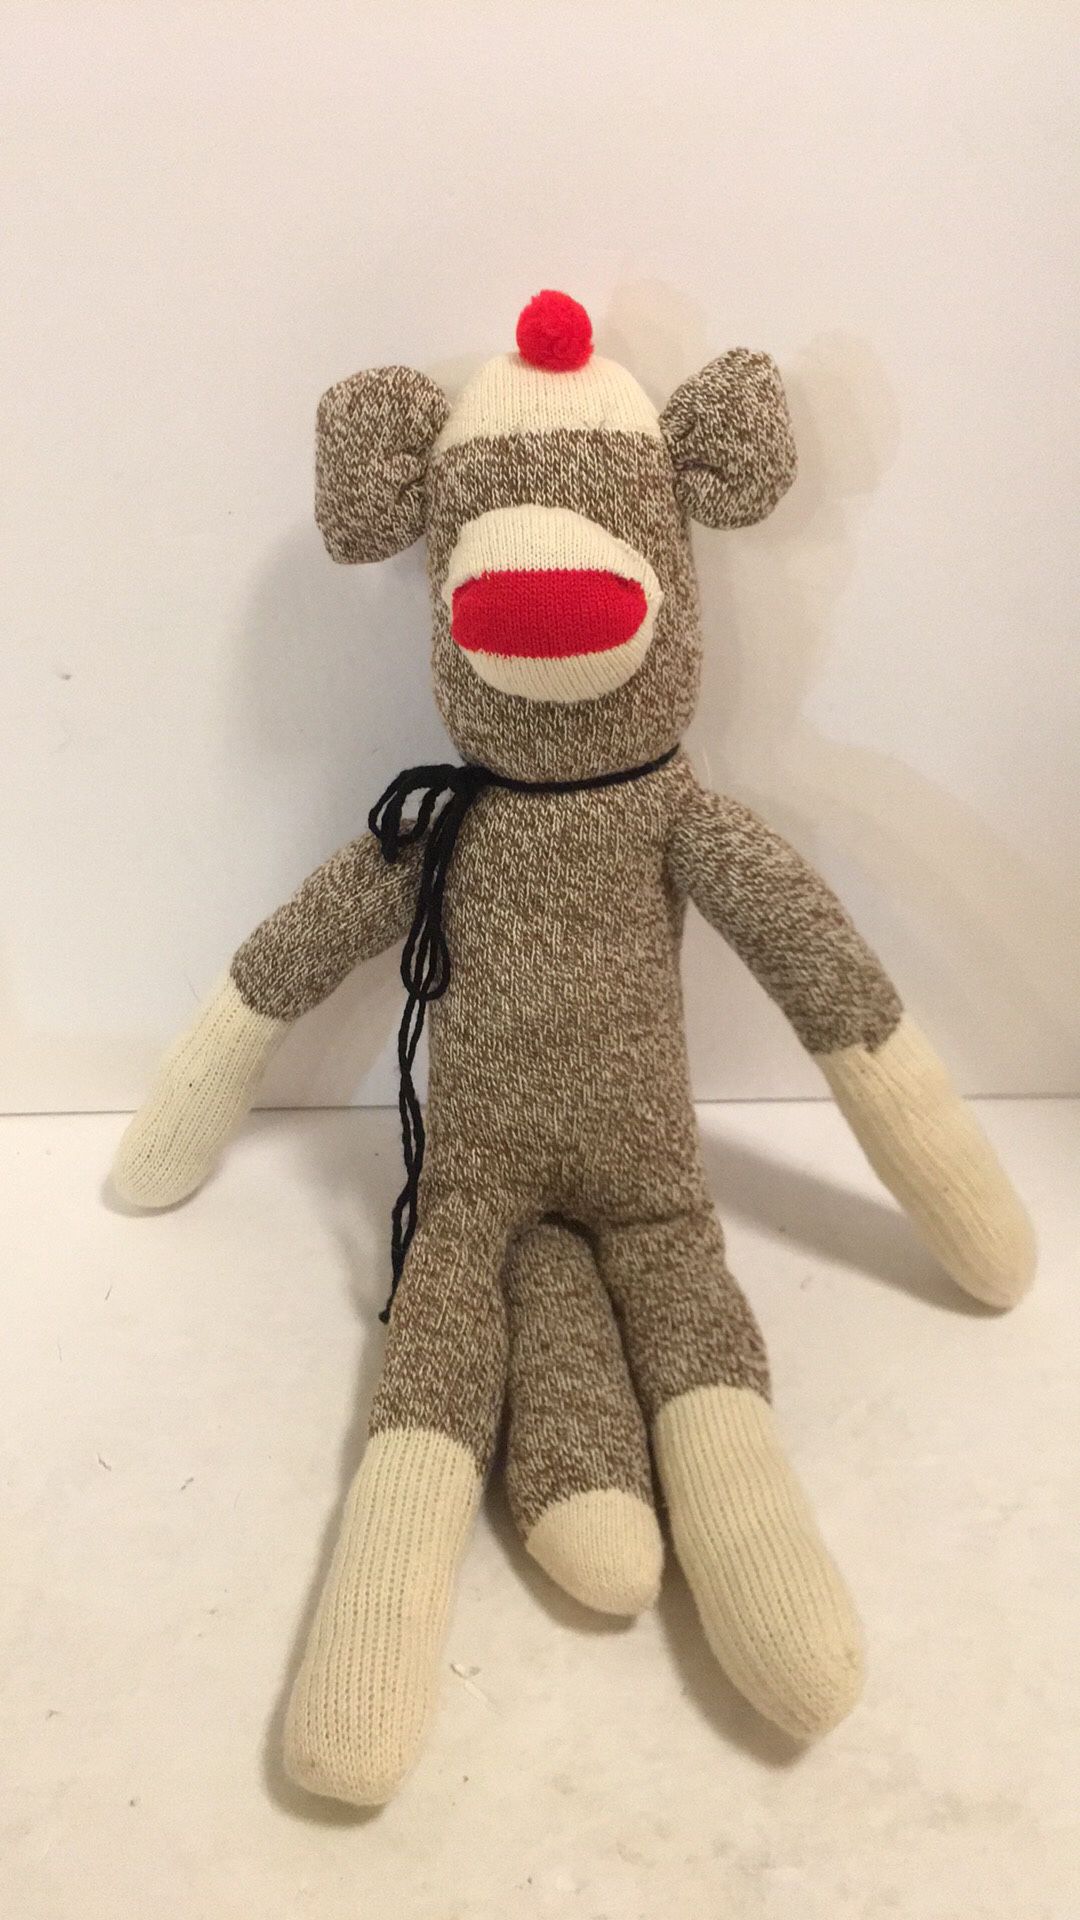 Sock monkey type 20”Tall hand made stuffed Animal. Well made well cared for. 